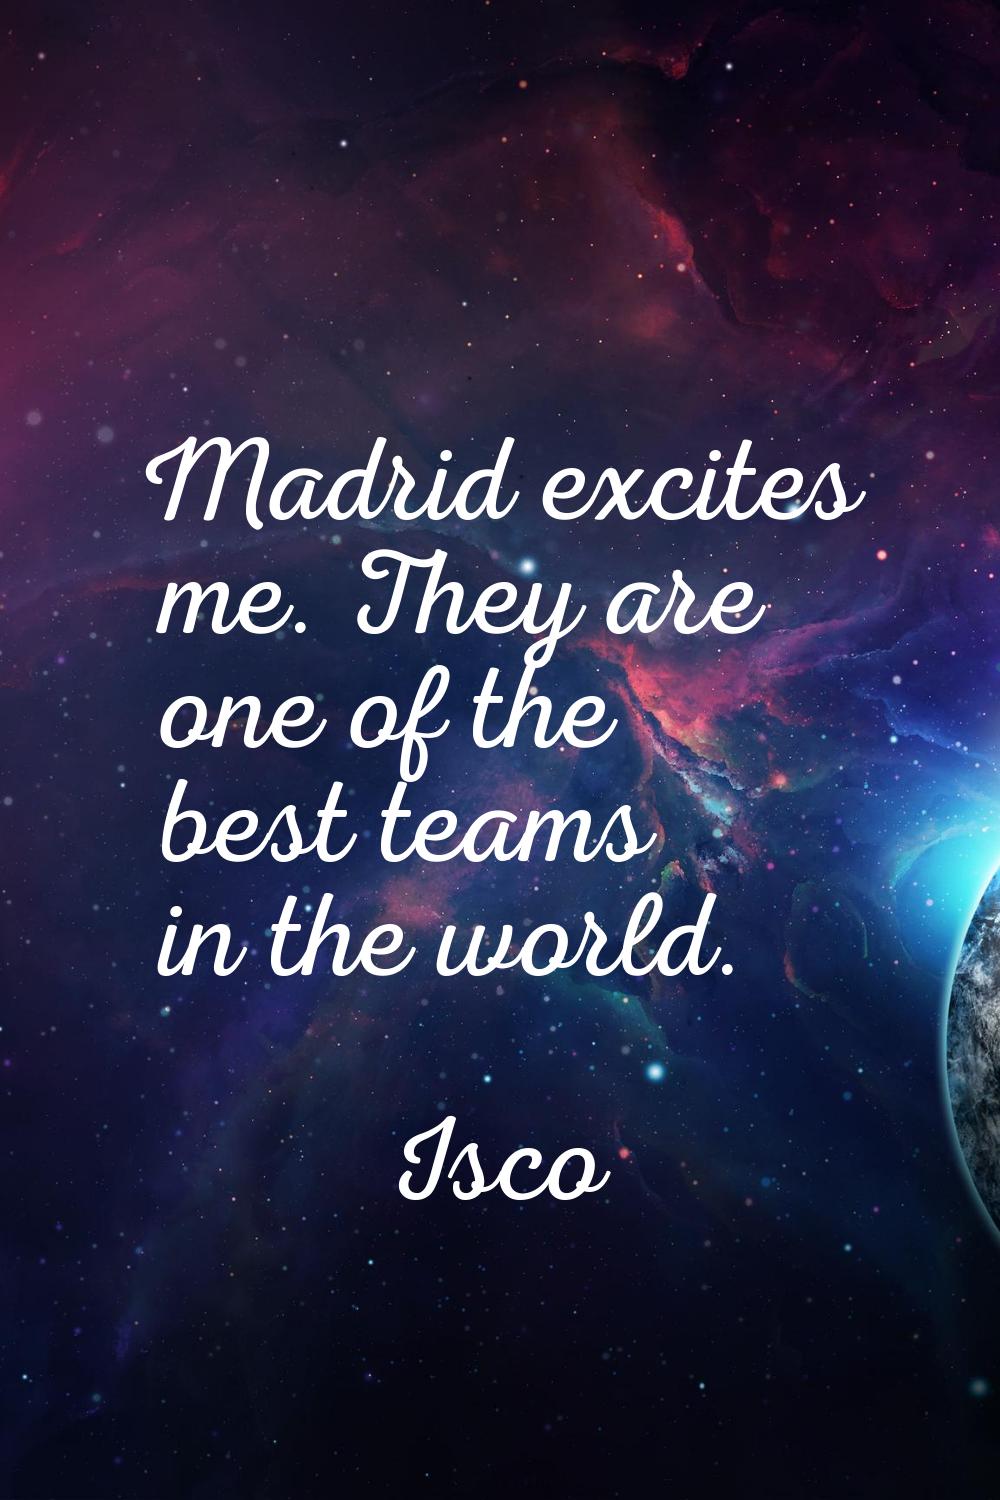 Madrid excites me. They are one of the best teams in the world.